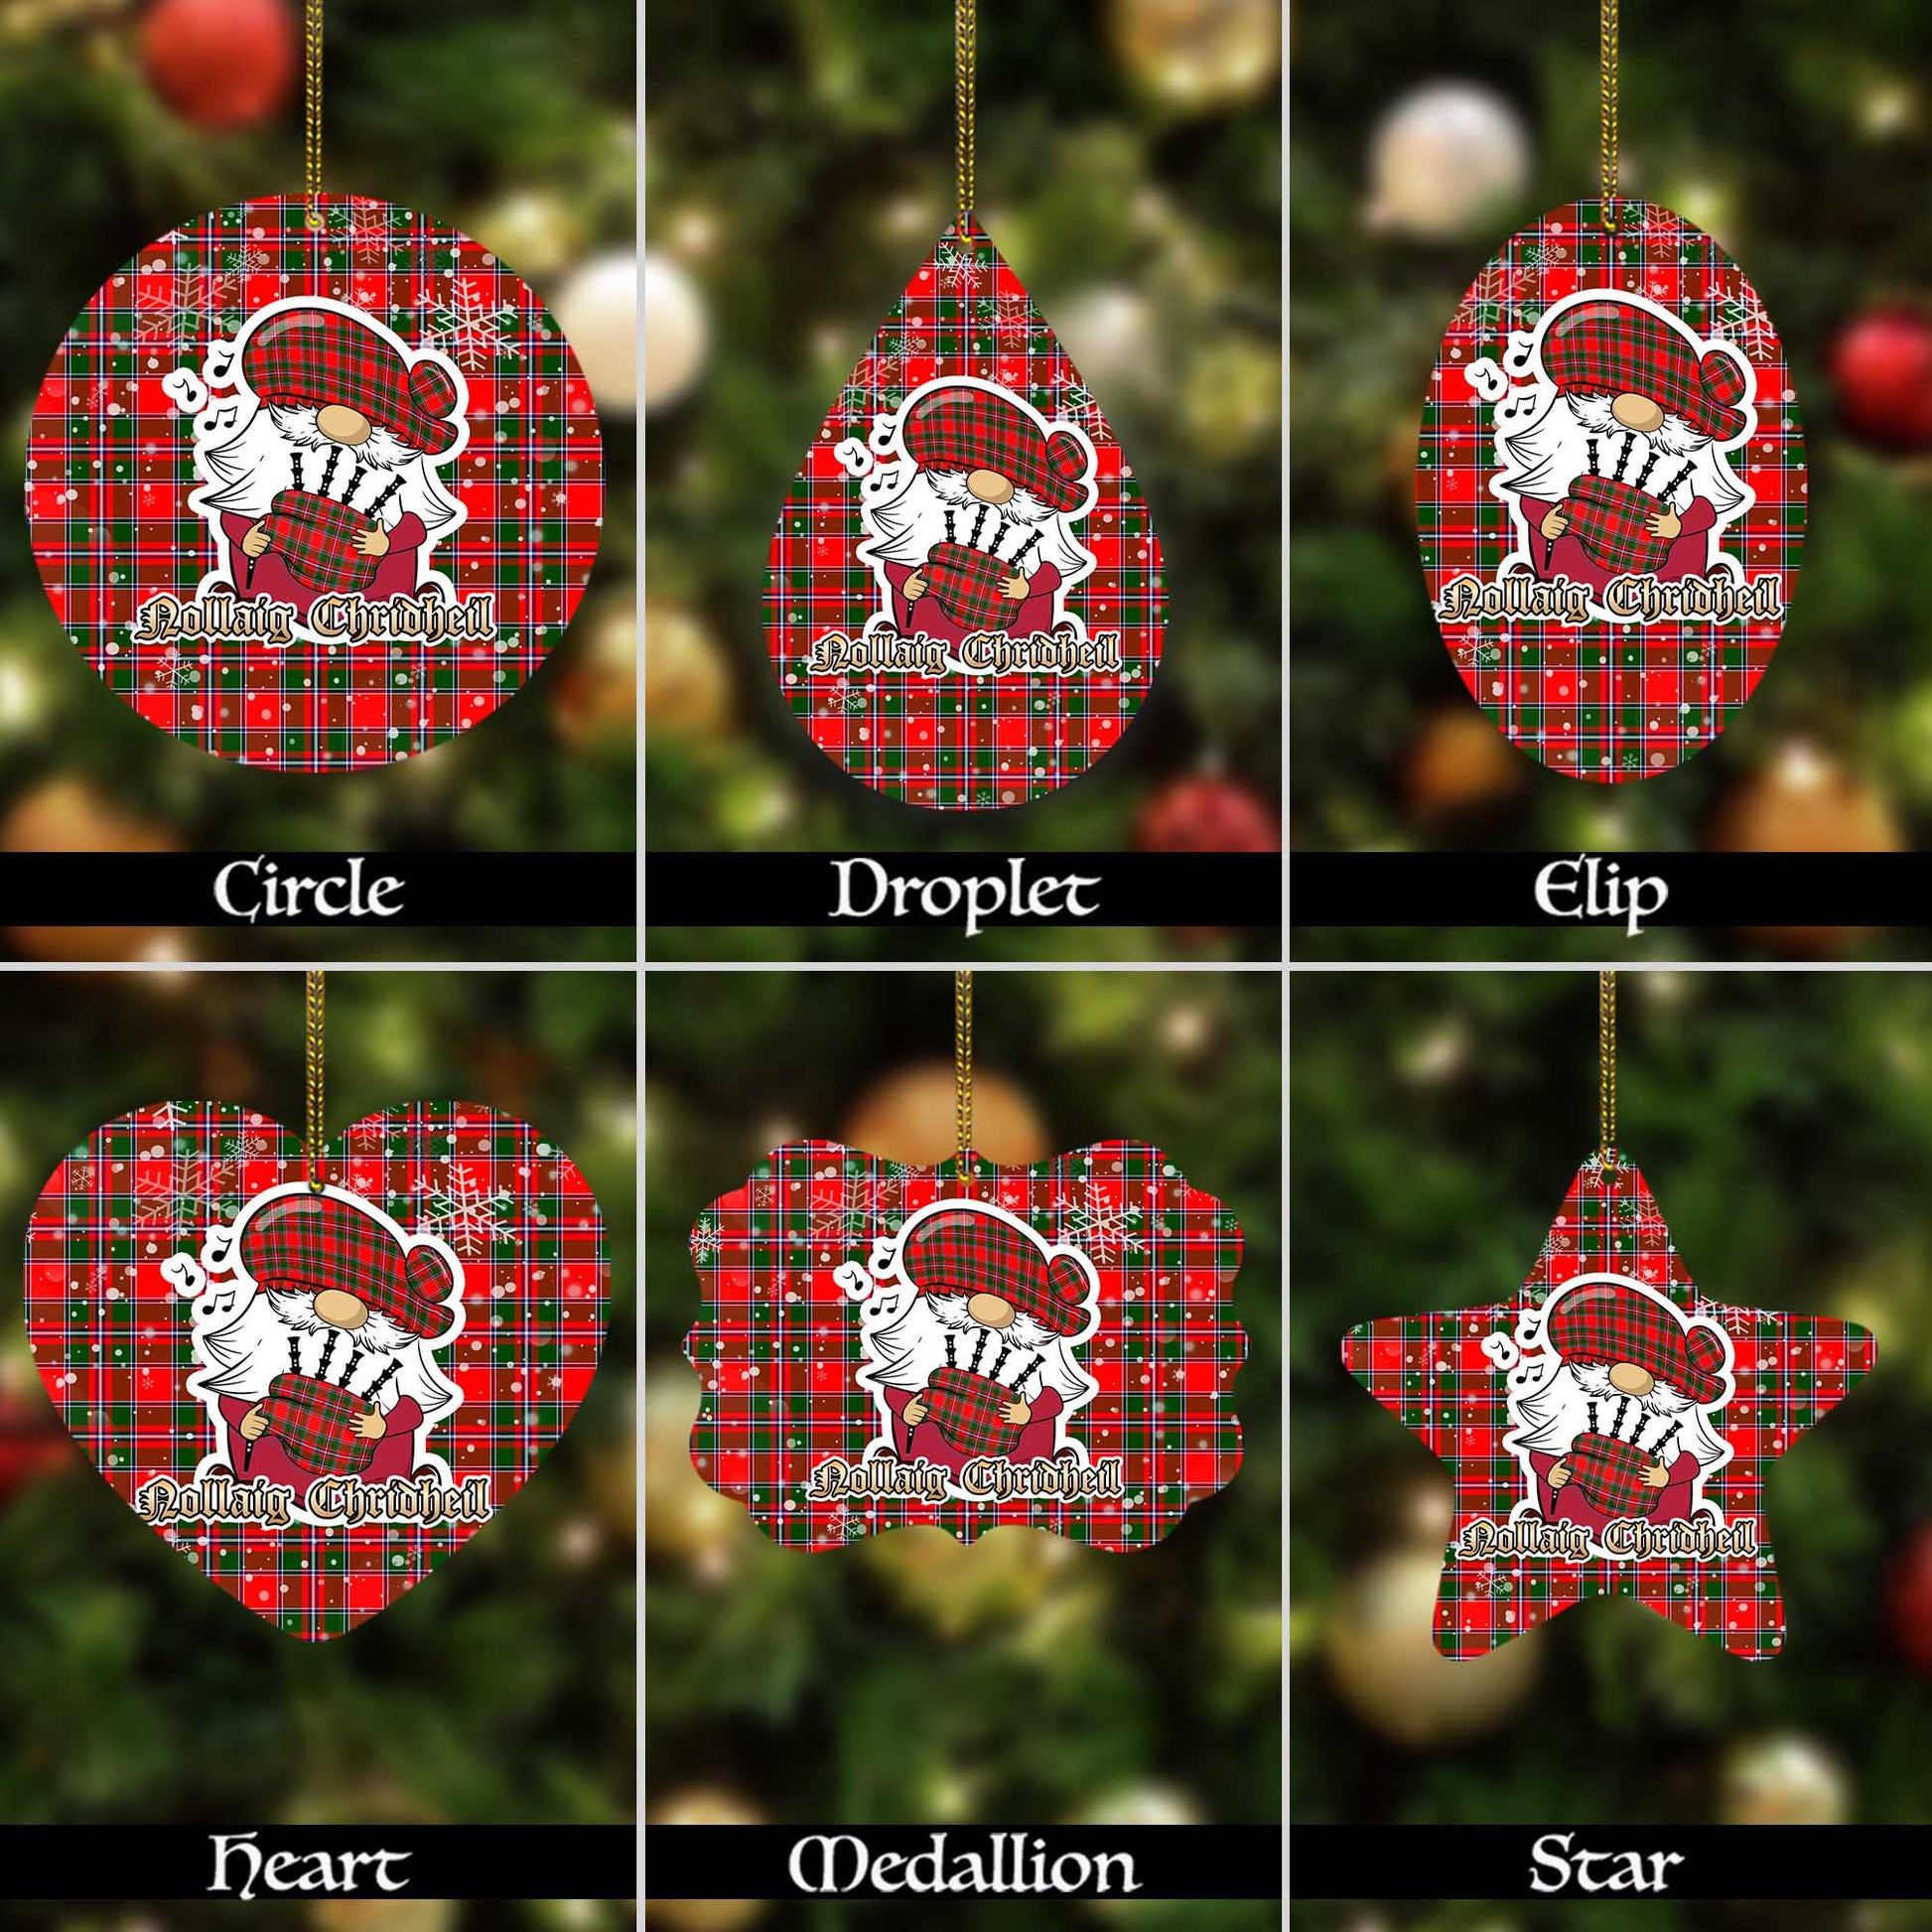 spens-modern-tartan-christmas-ornaments-with-scottish-gnome-playing-bagpipes